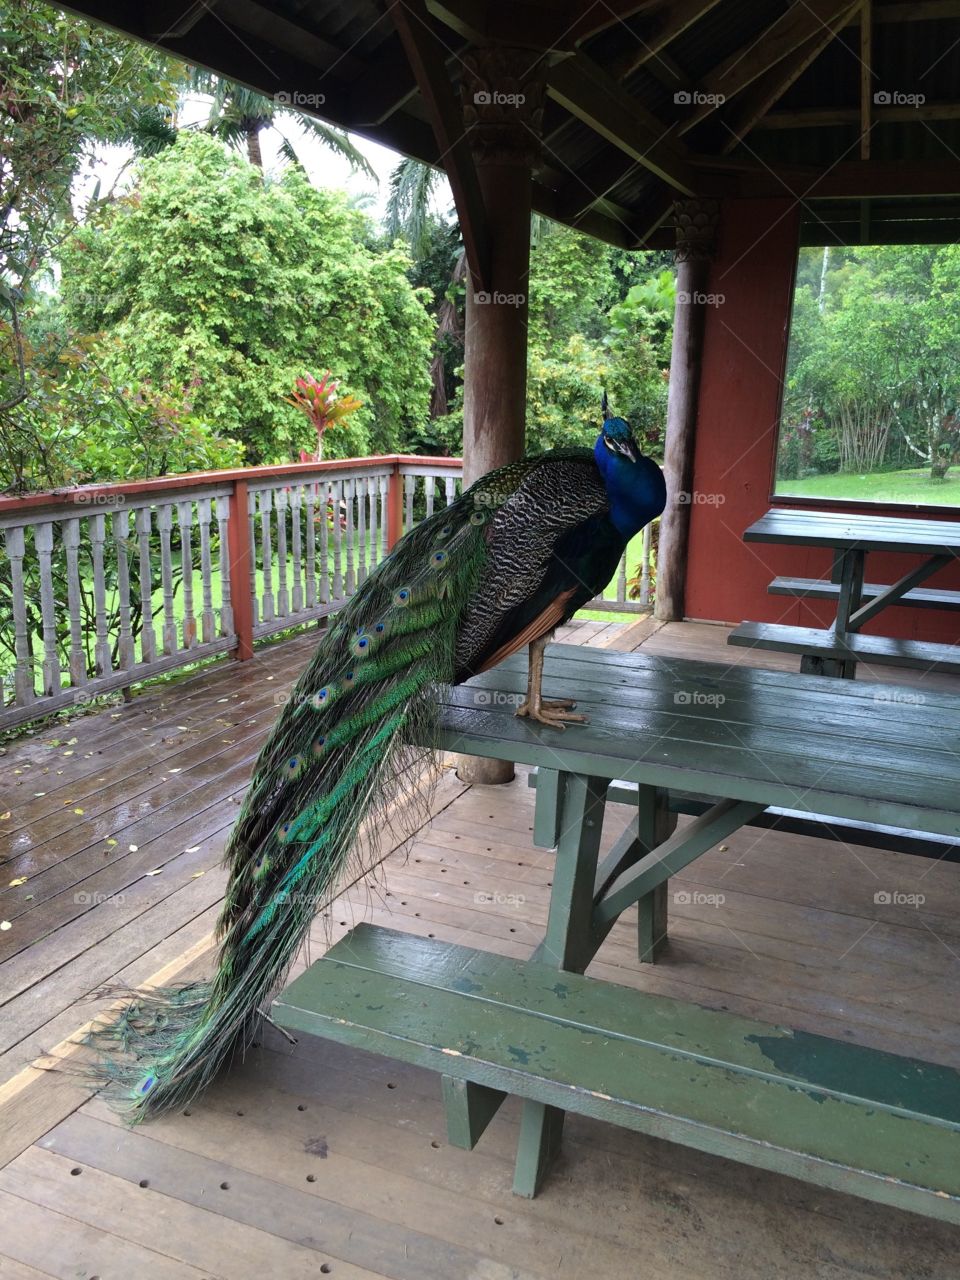 Peacock for lunch